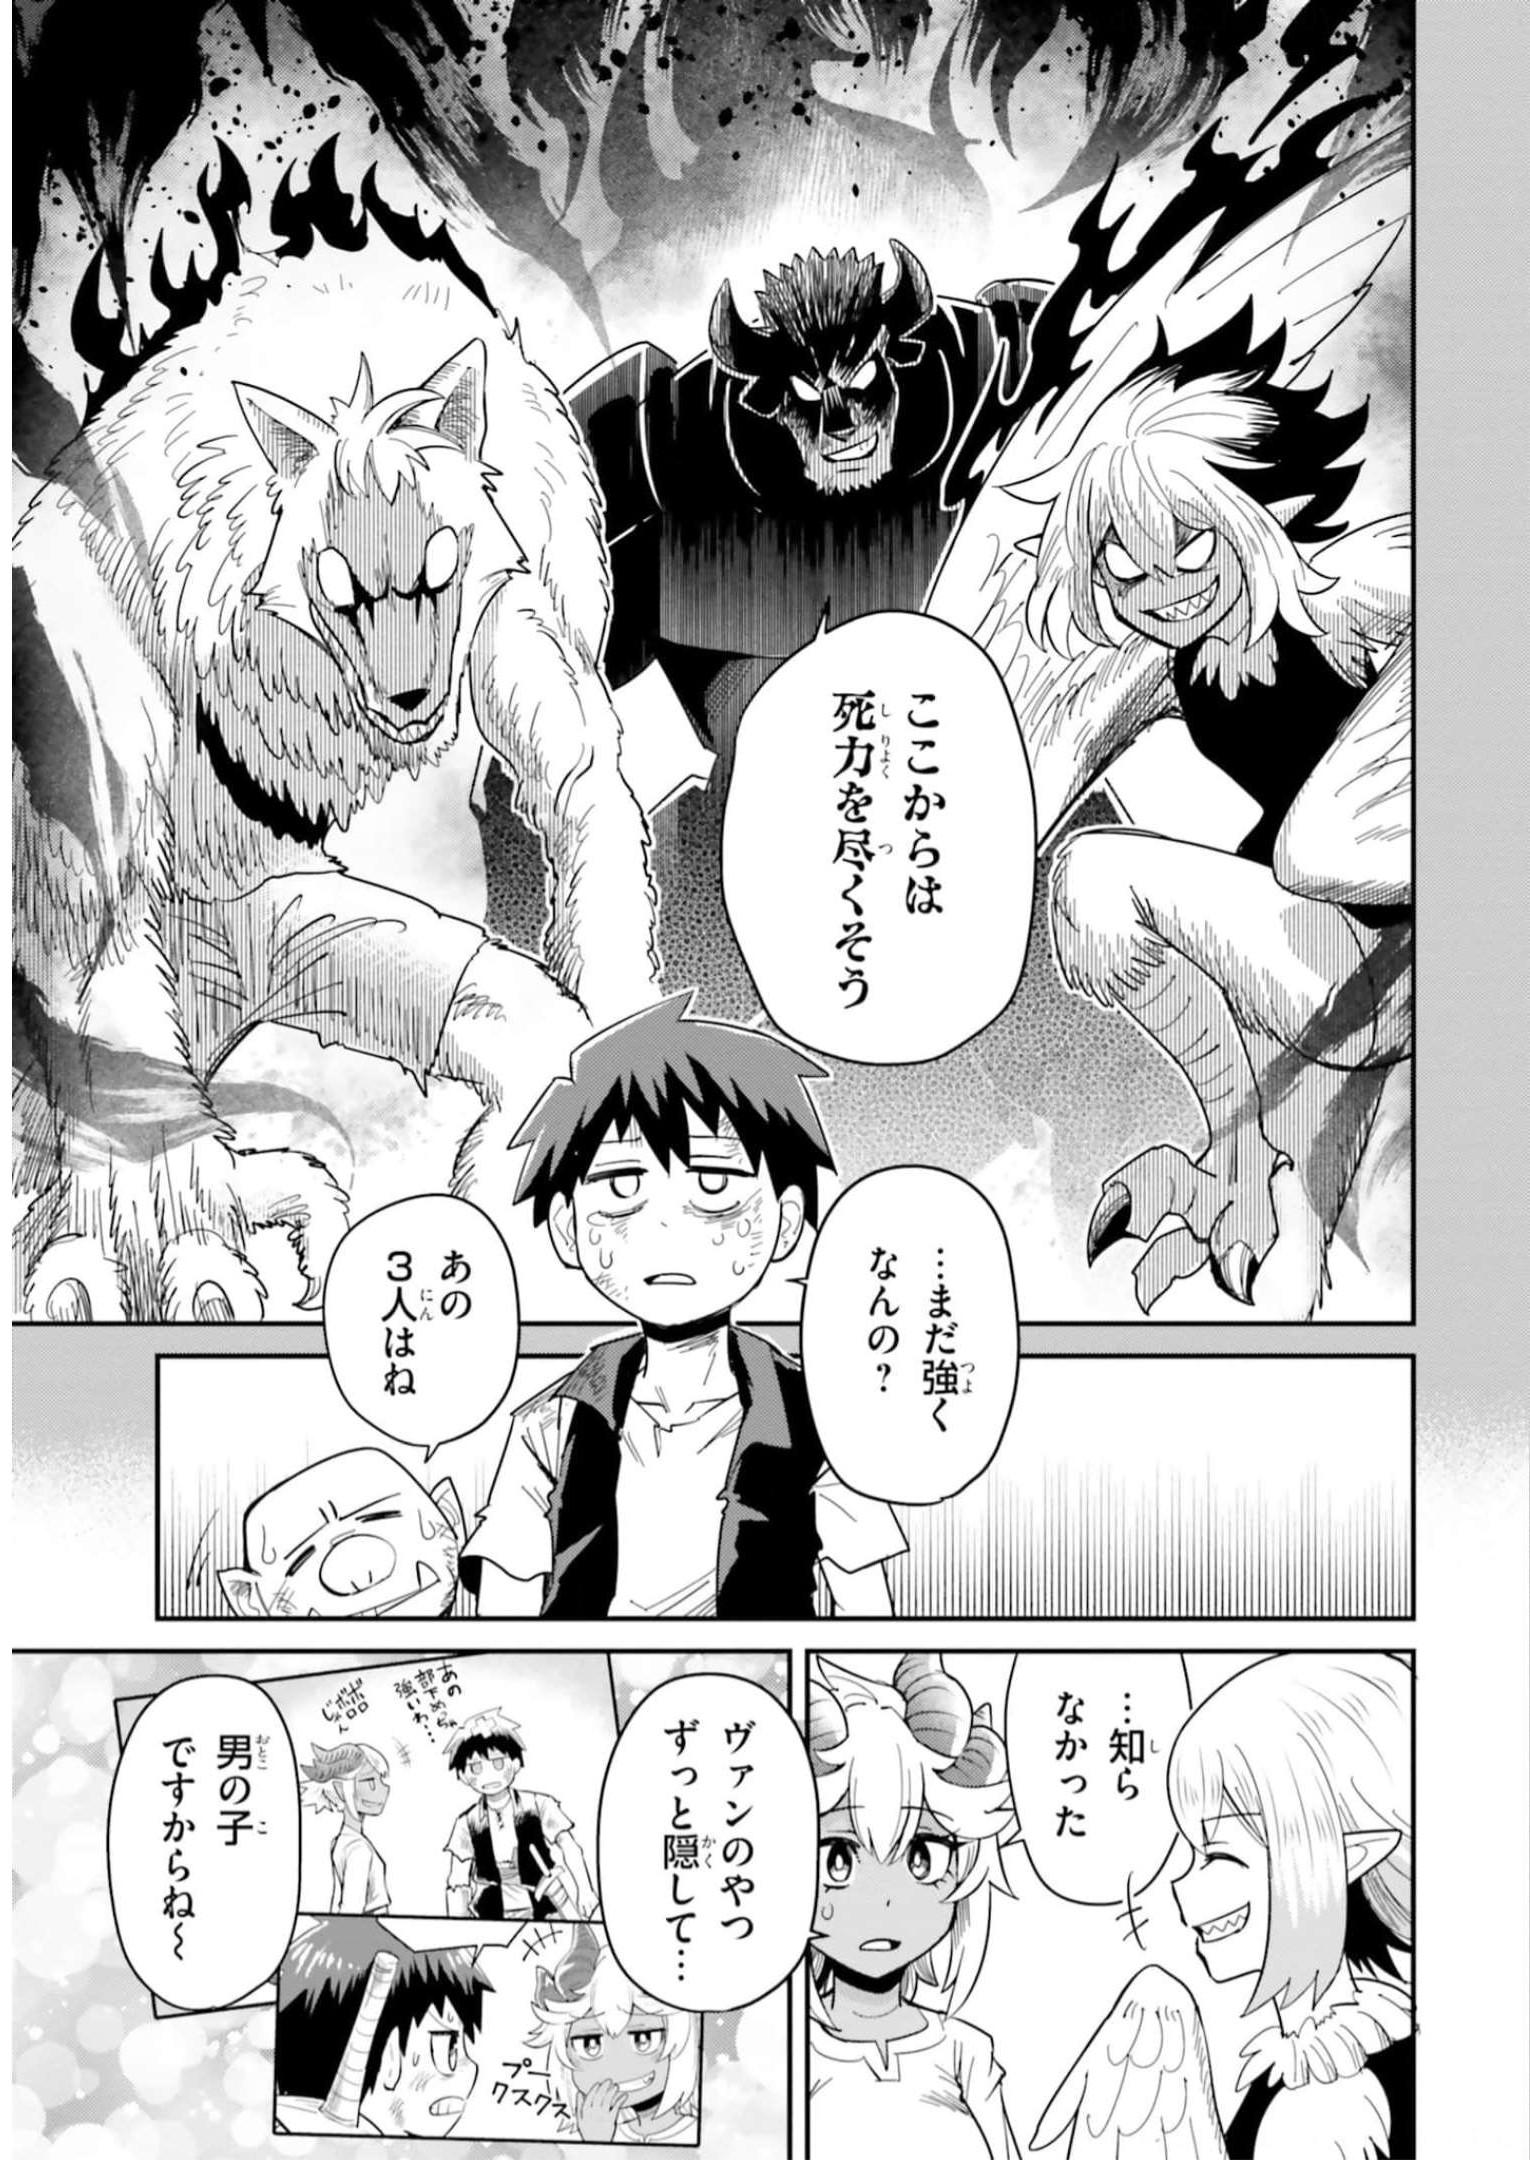 Dungeon Friends Forever Dungeon’s Childhood Friend ダンジョンの幼なじみ 第26話 - Page 11